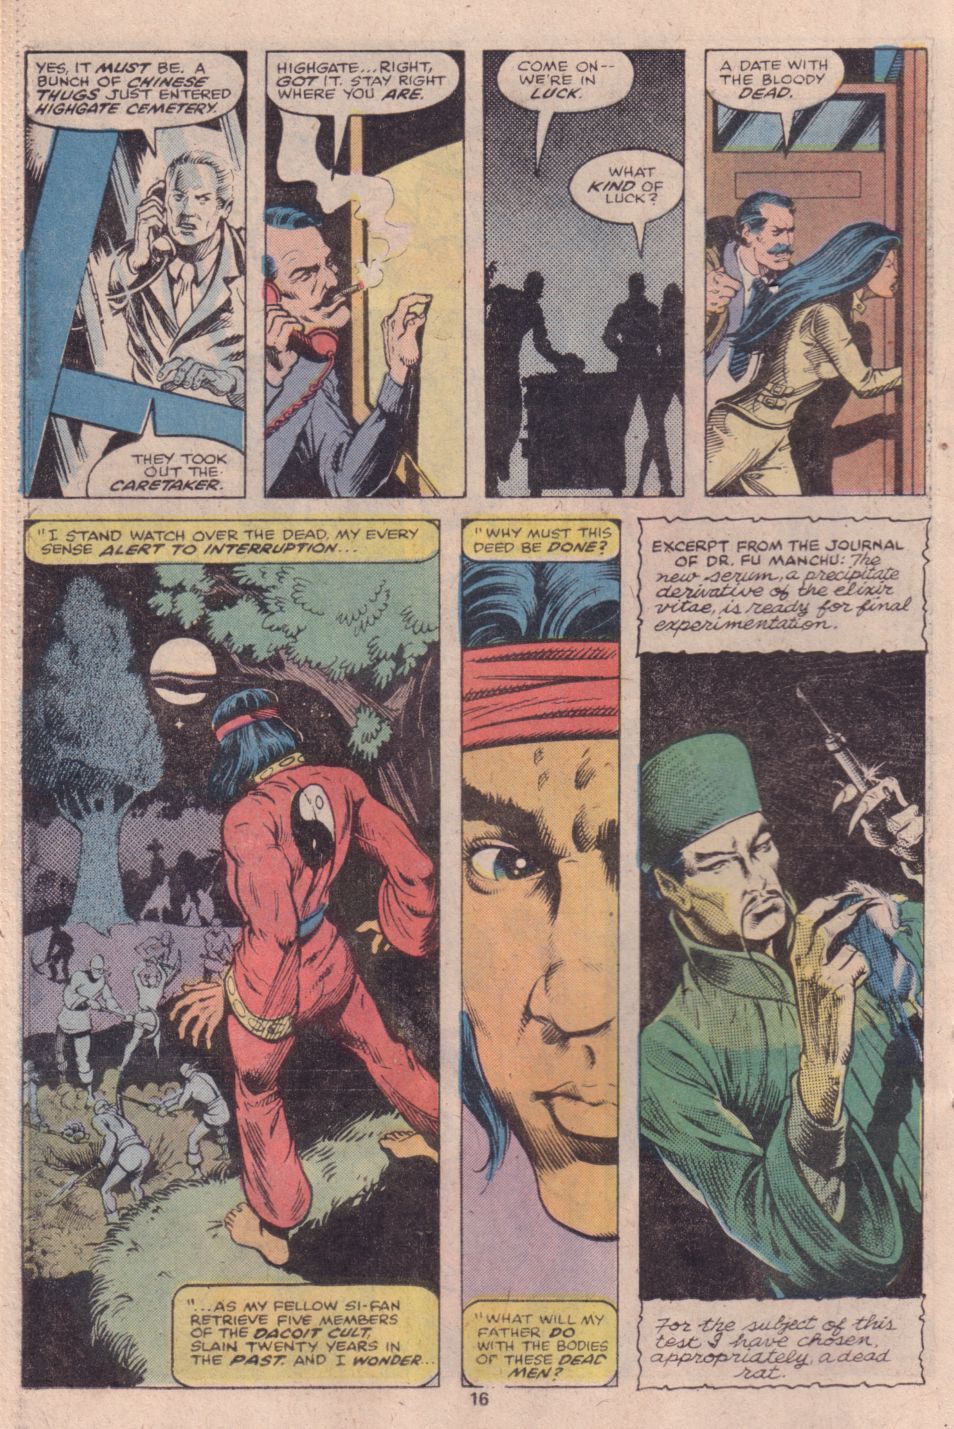 What If? (1977) Issue #16 - Shang Chi Master of Kung Fu fought on The side of Fu Manchu #16 - English 13